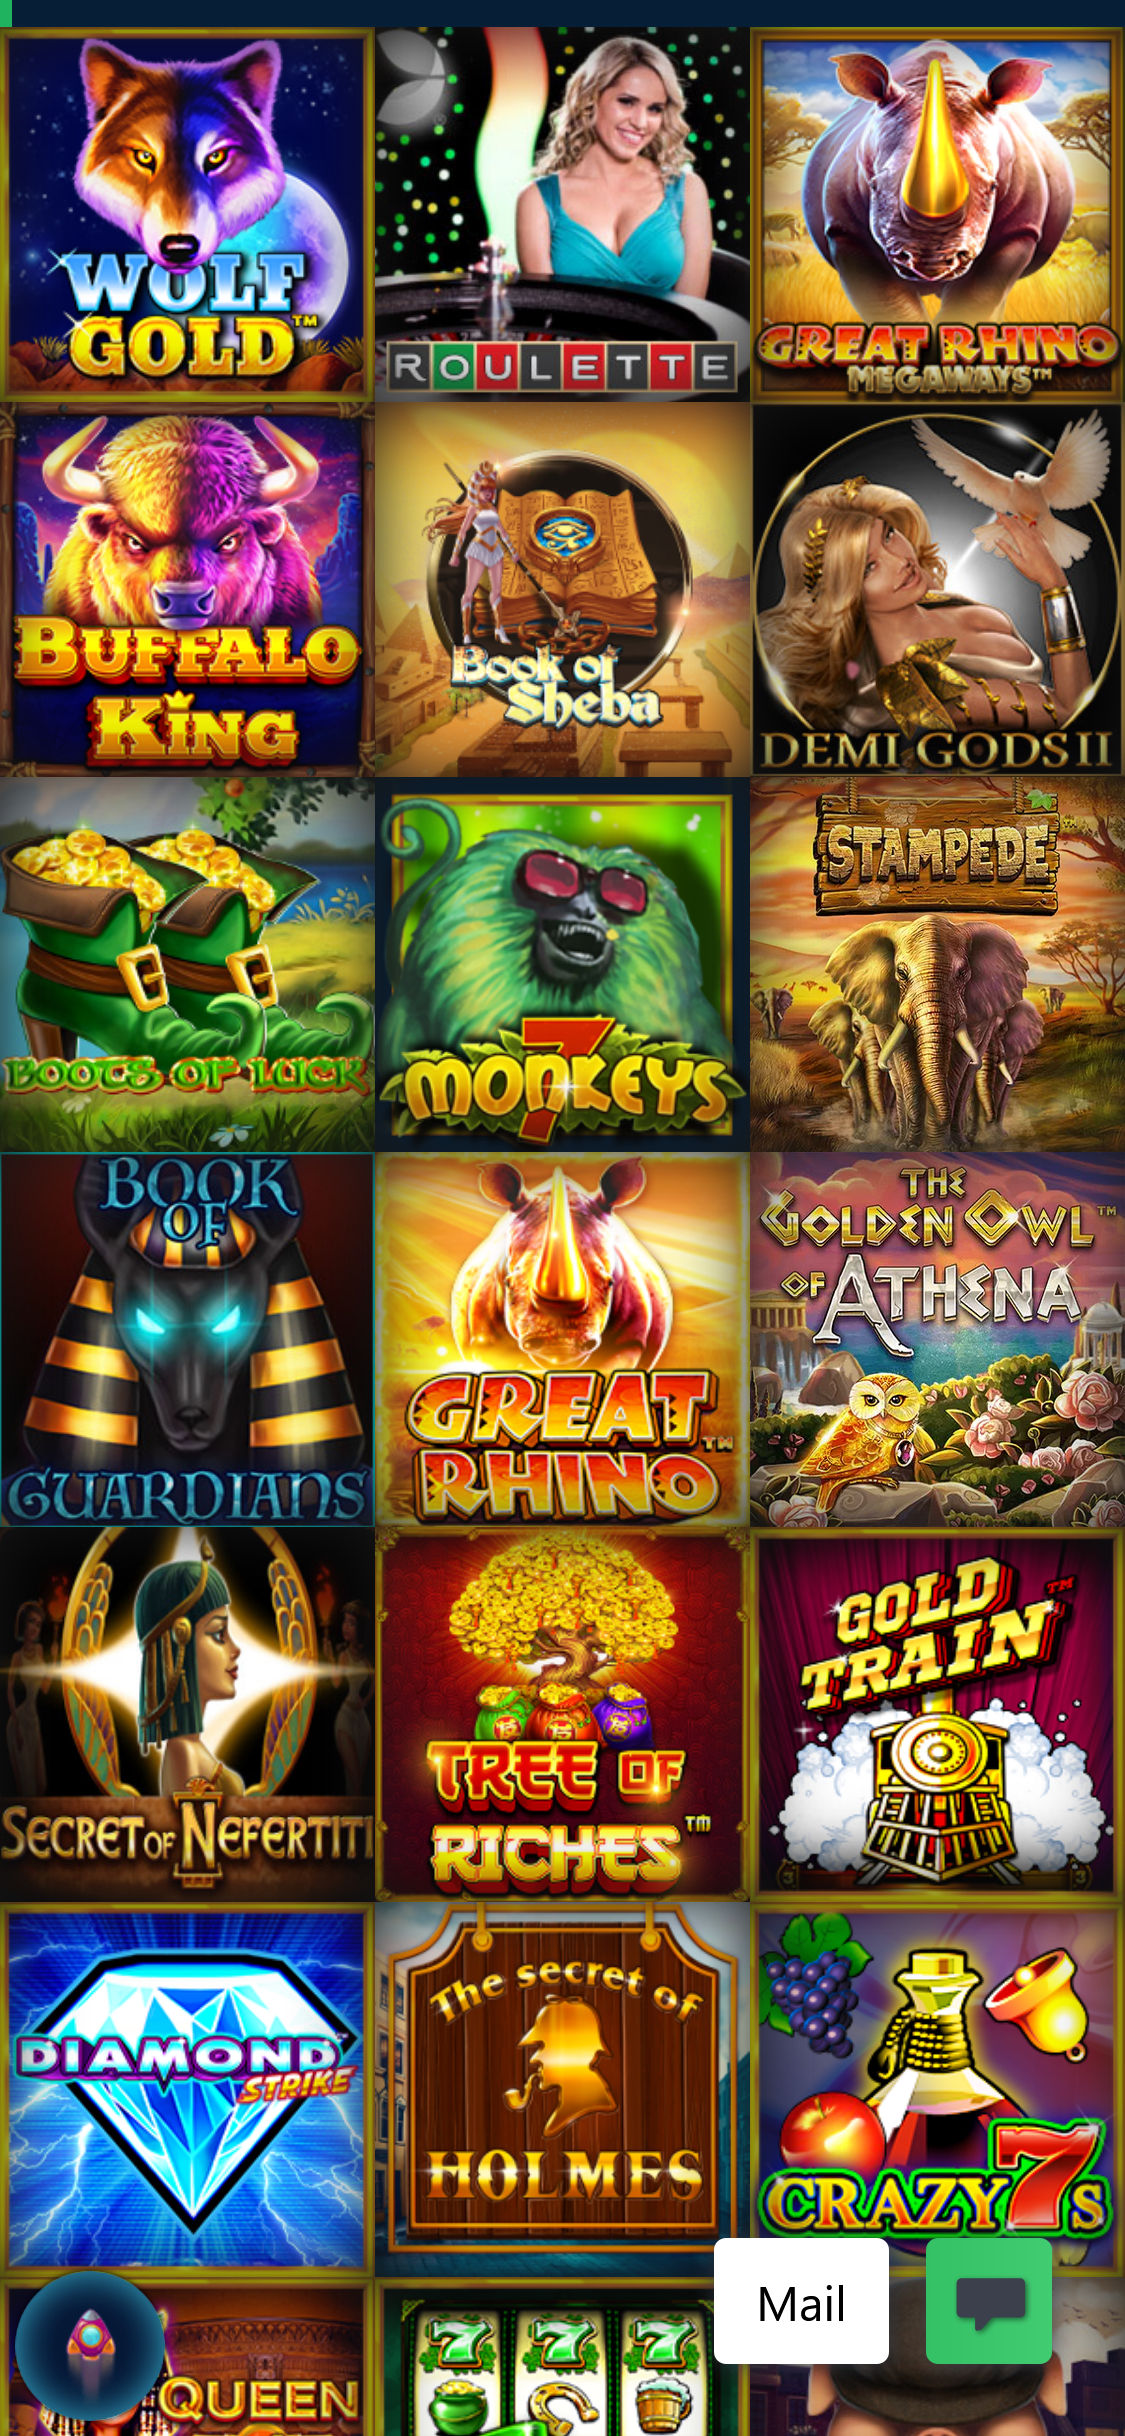 Cosmoswin Casino Mobile Games Review